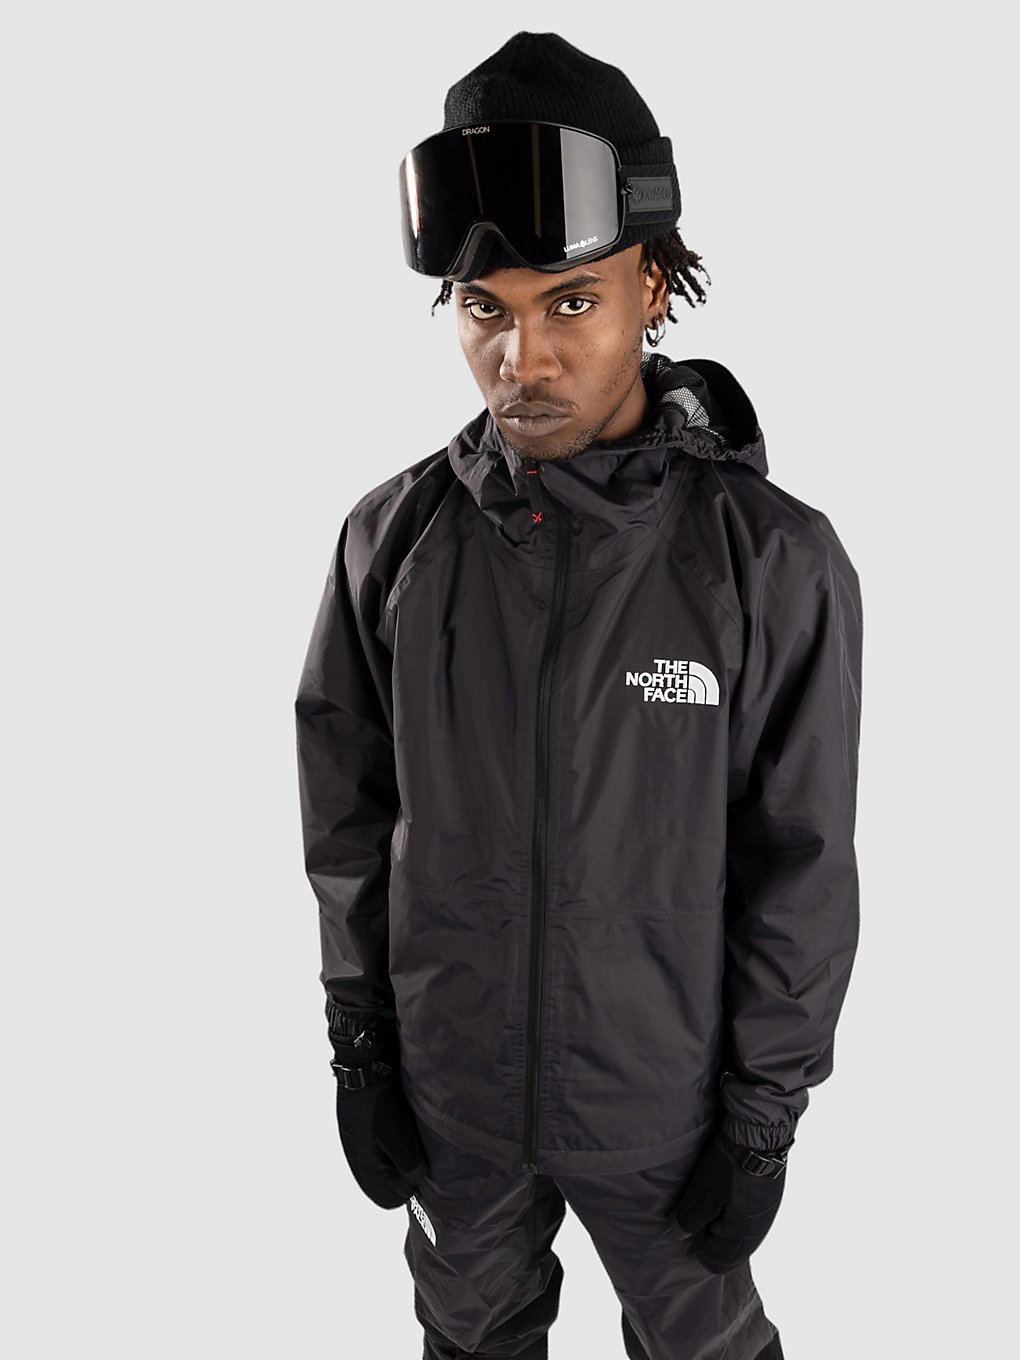 THE NORTH FACE Build Up Jacke tnf black kaufen